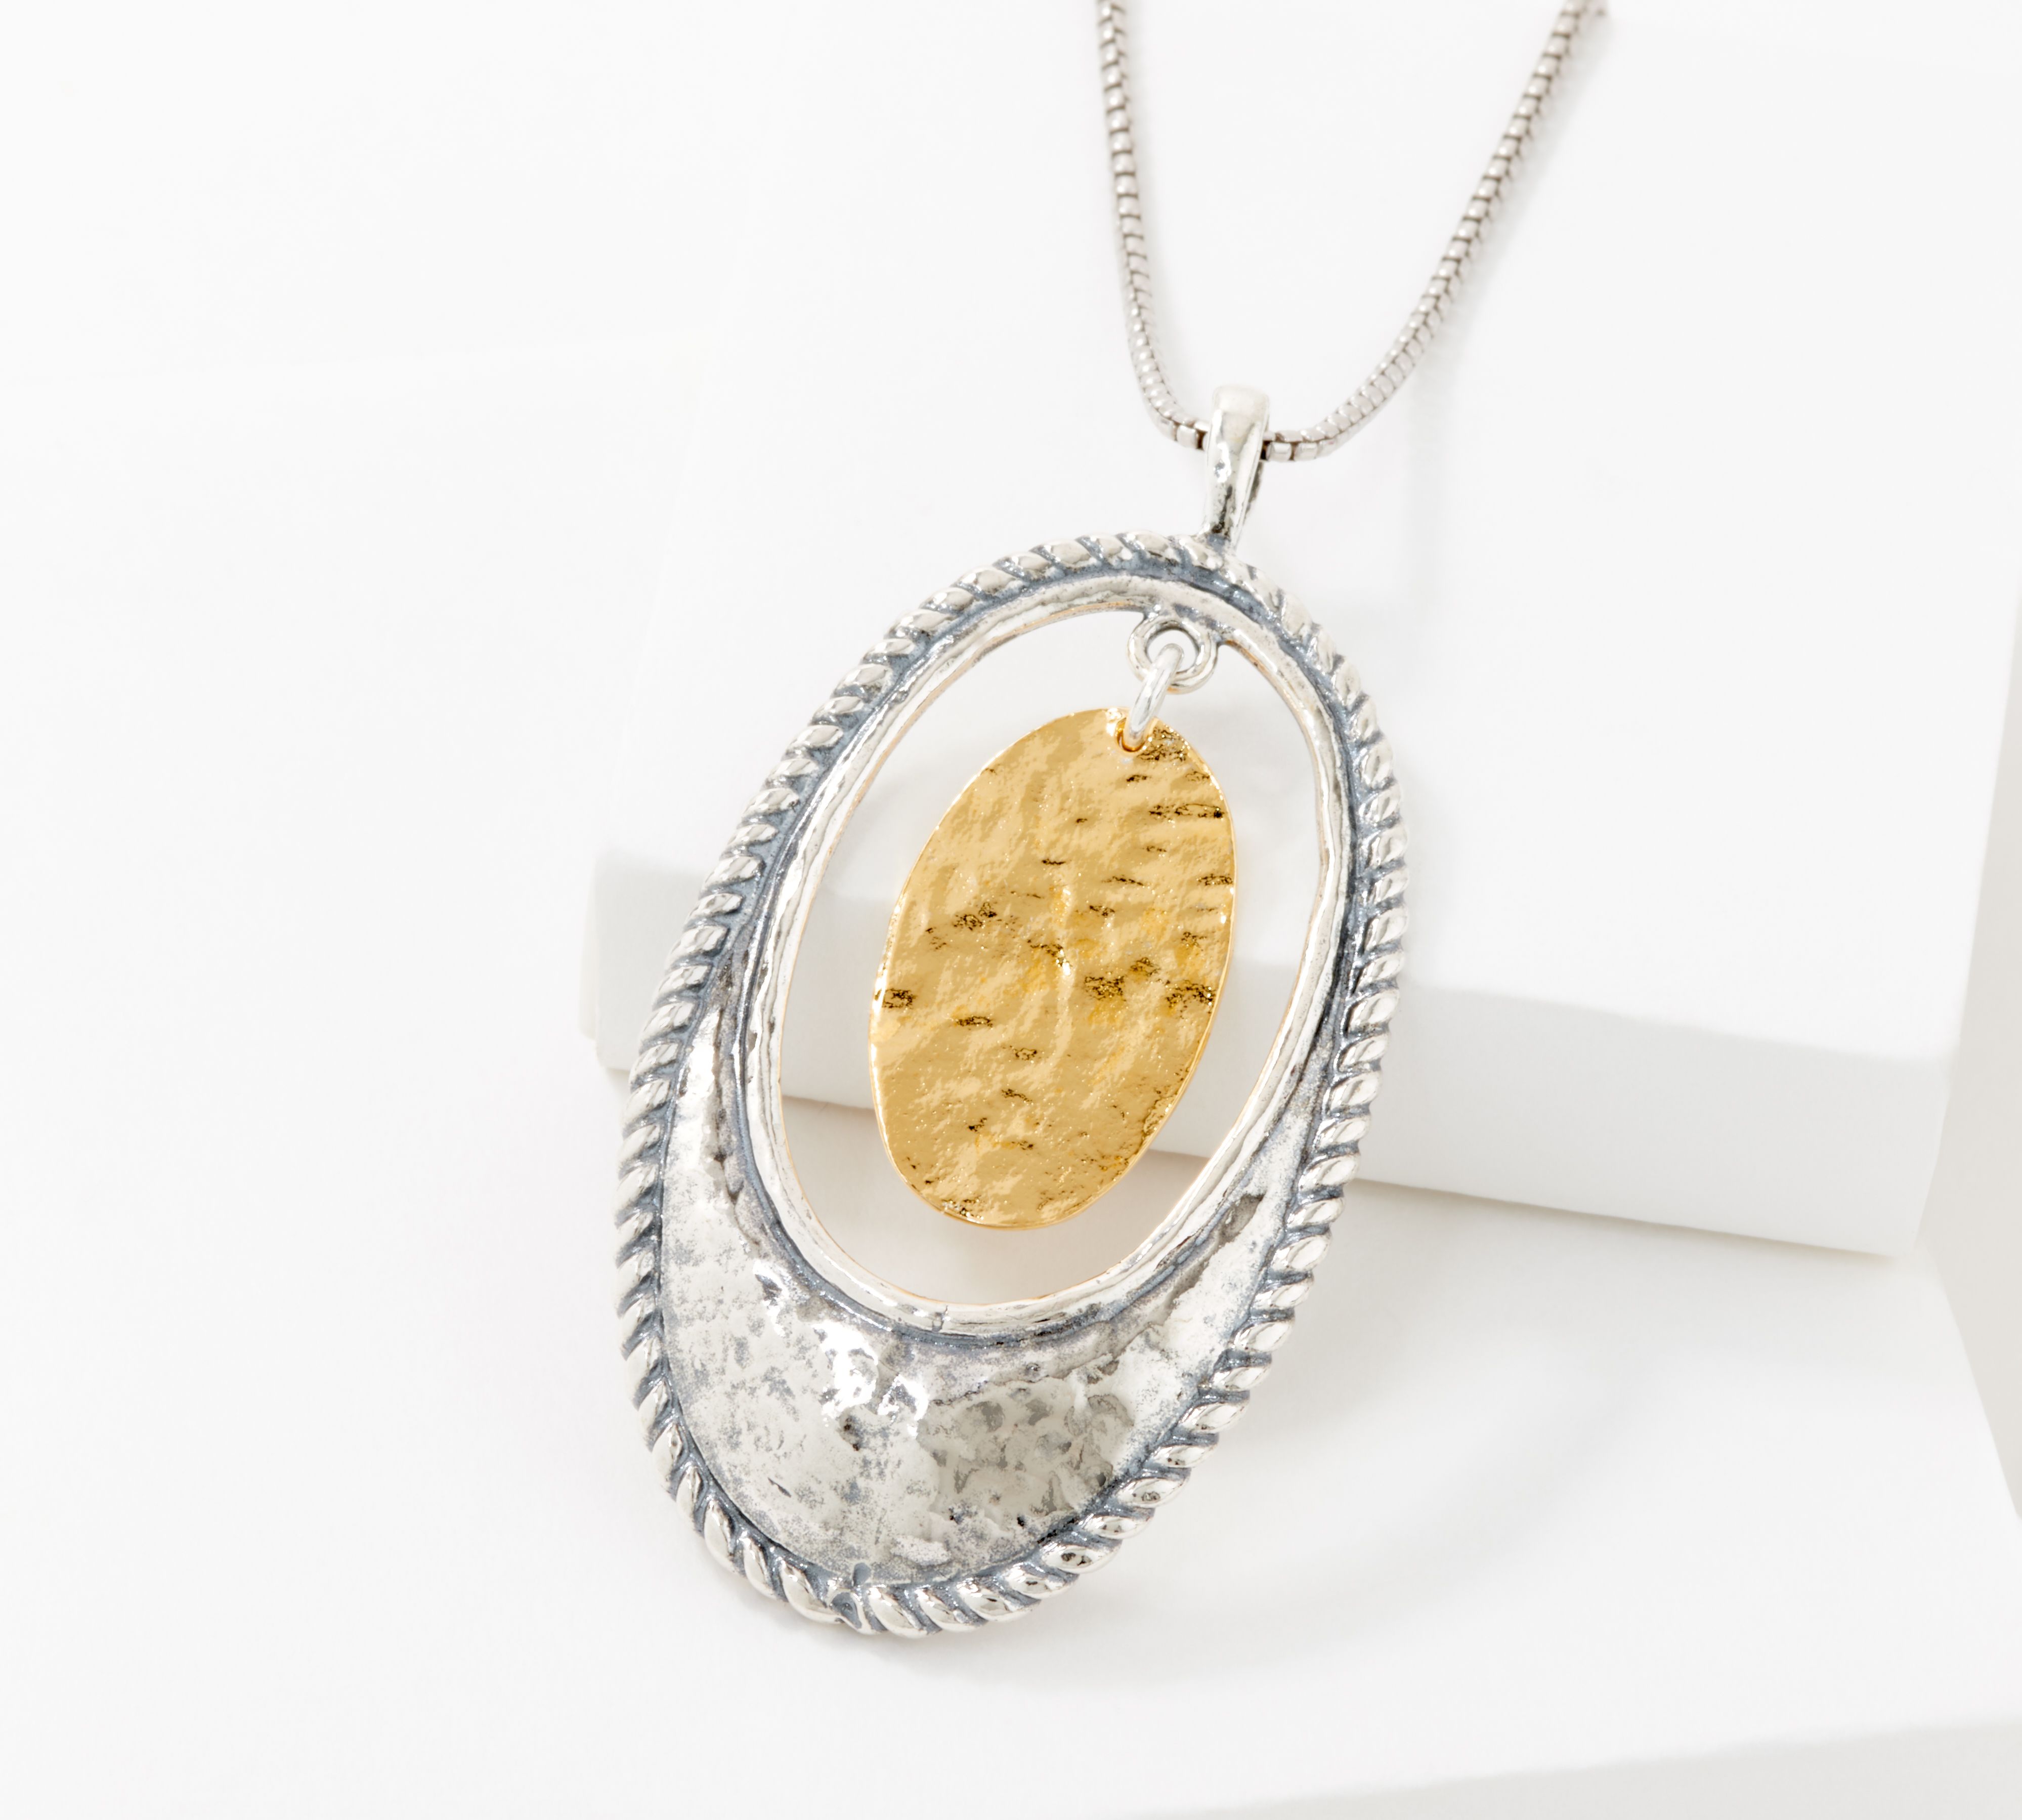 $20 off this oval pendant w/ 24" chain